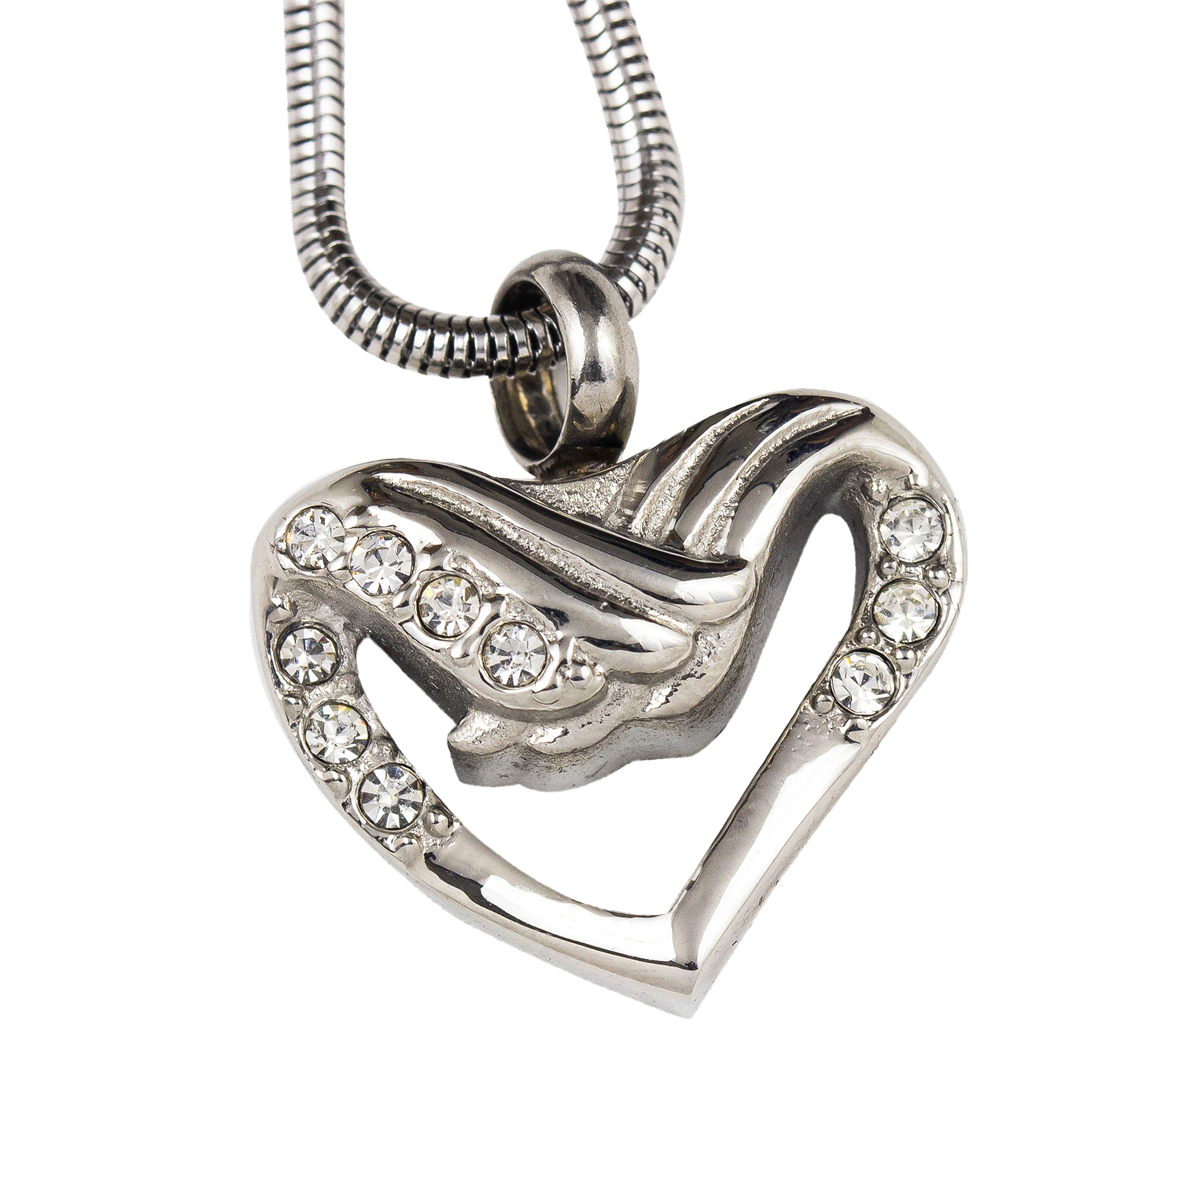 Heart with Wings Stainless Steel Pendant